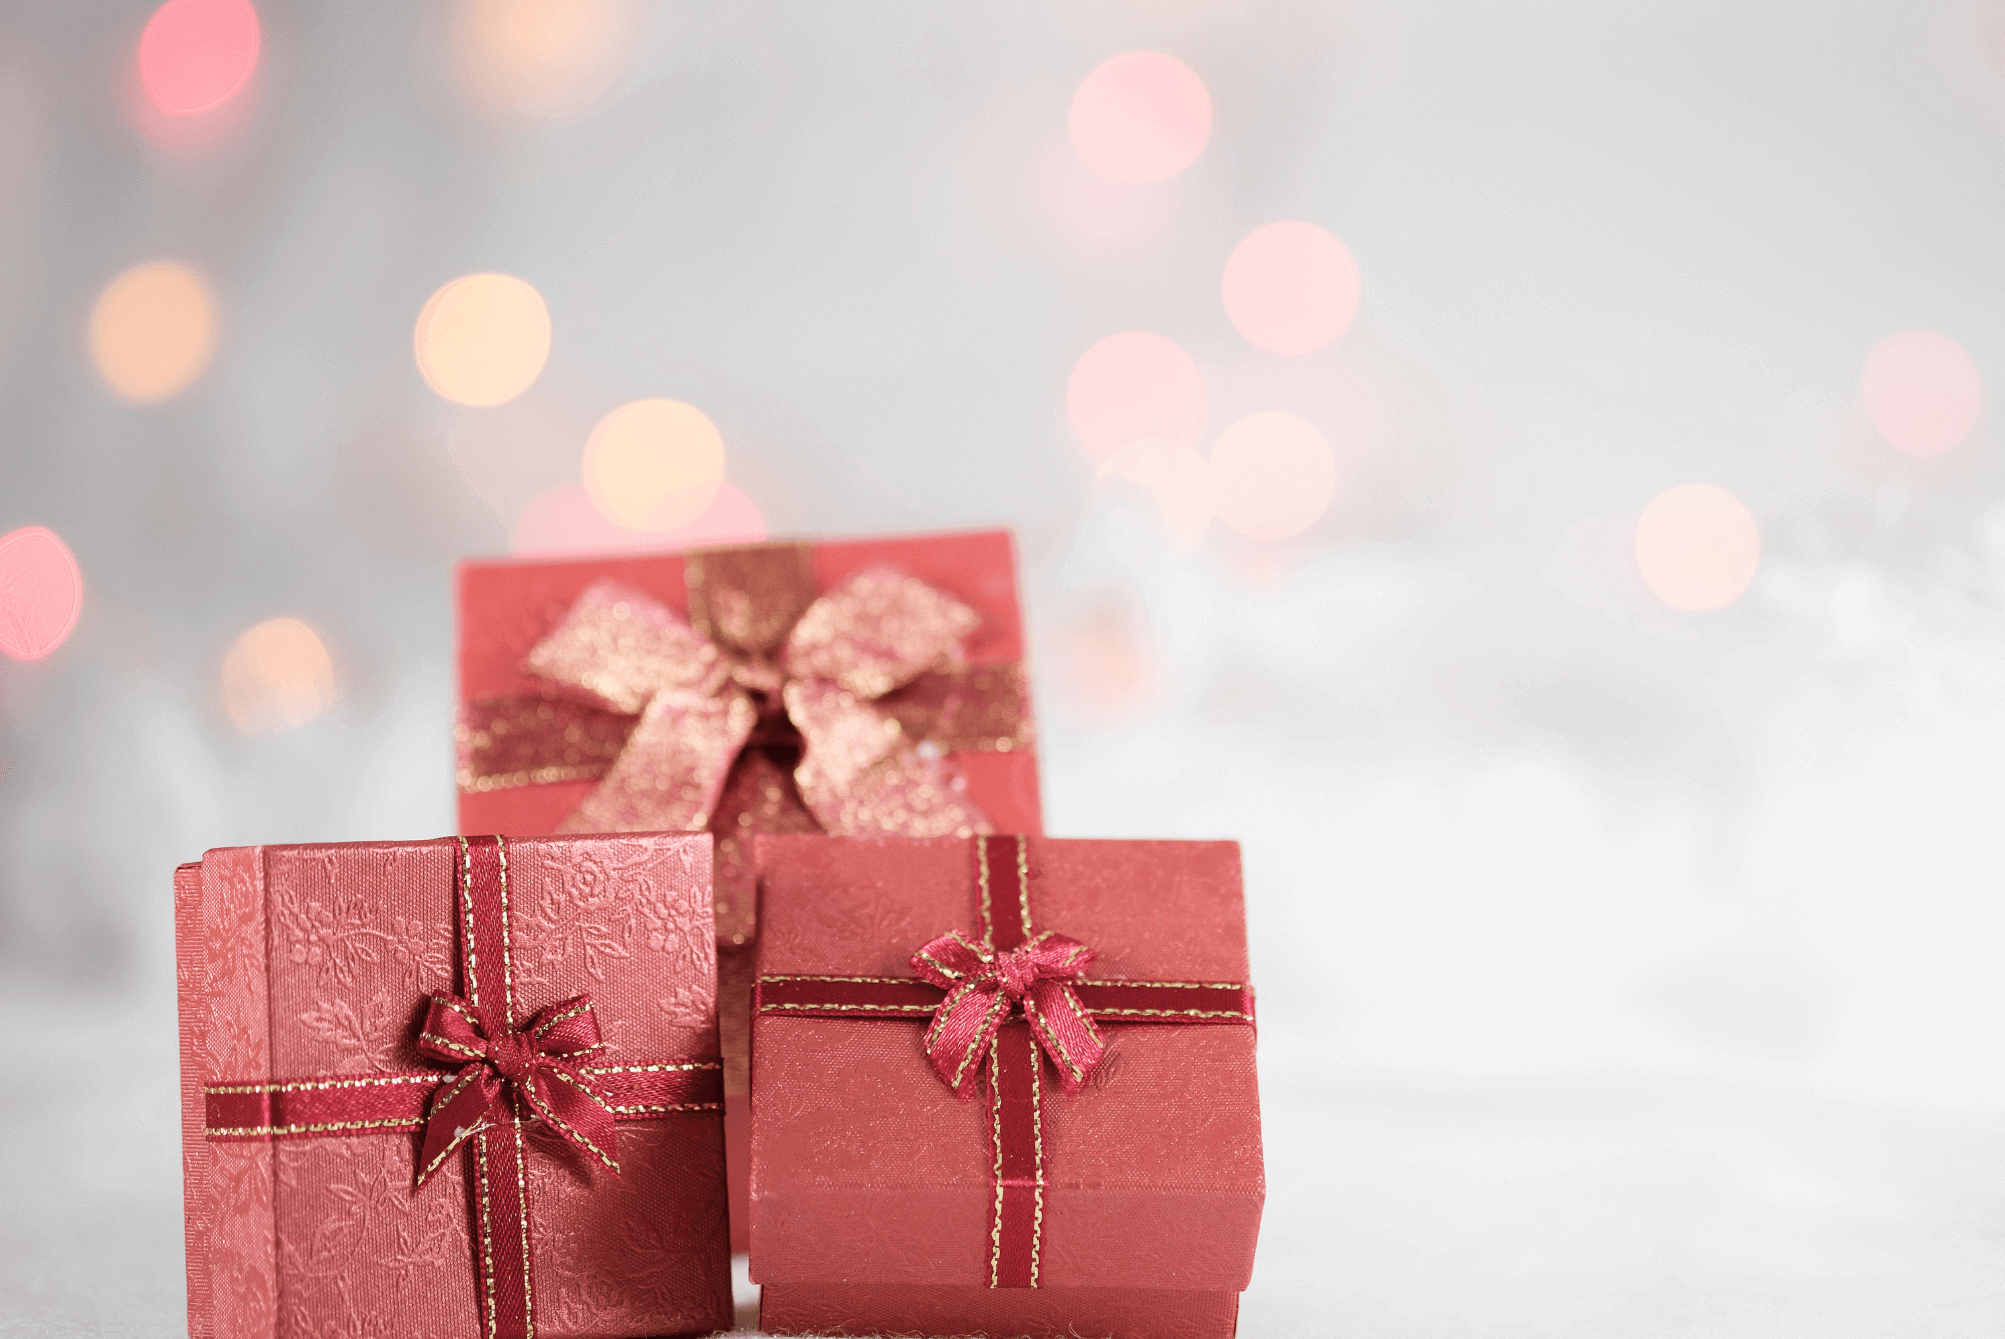 Are you a Christmas day tax filer?